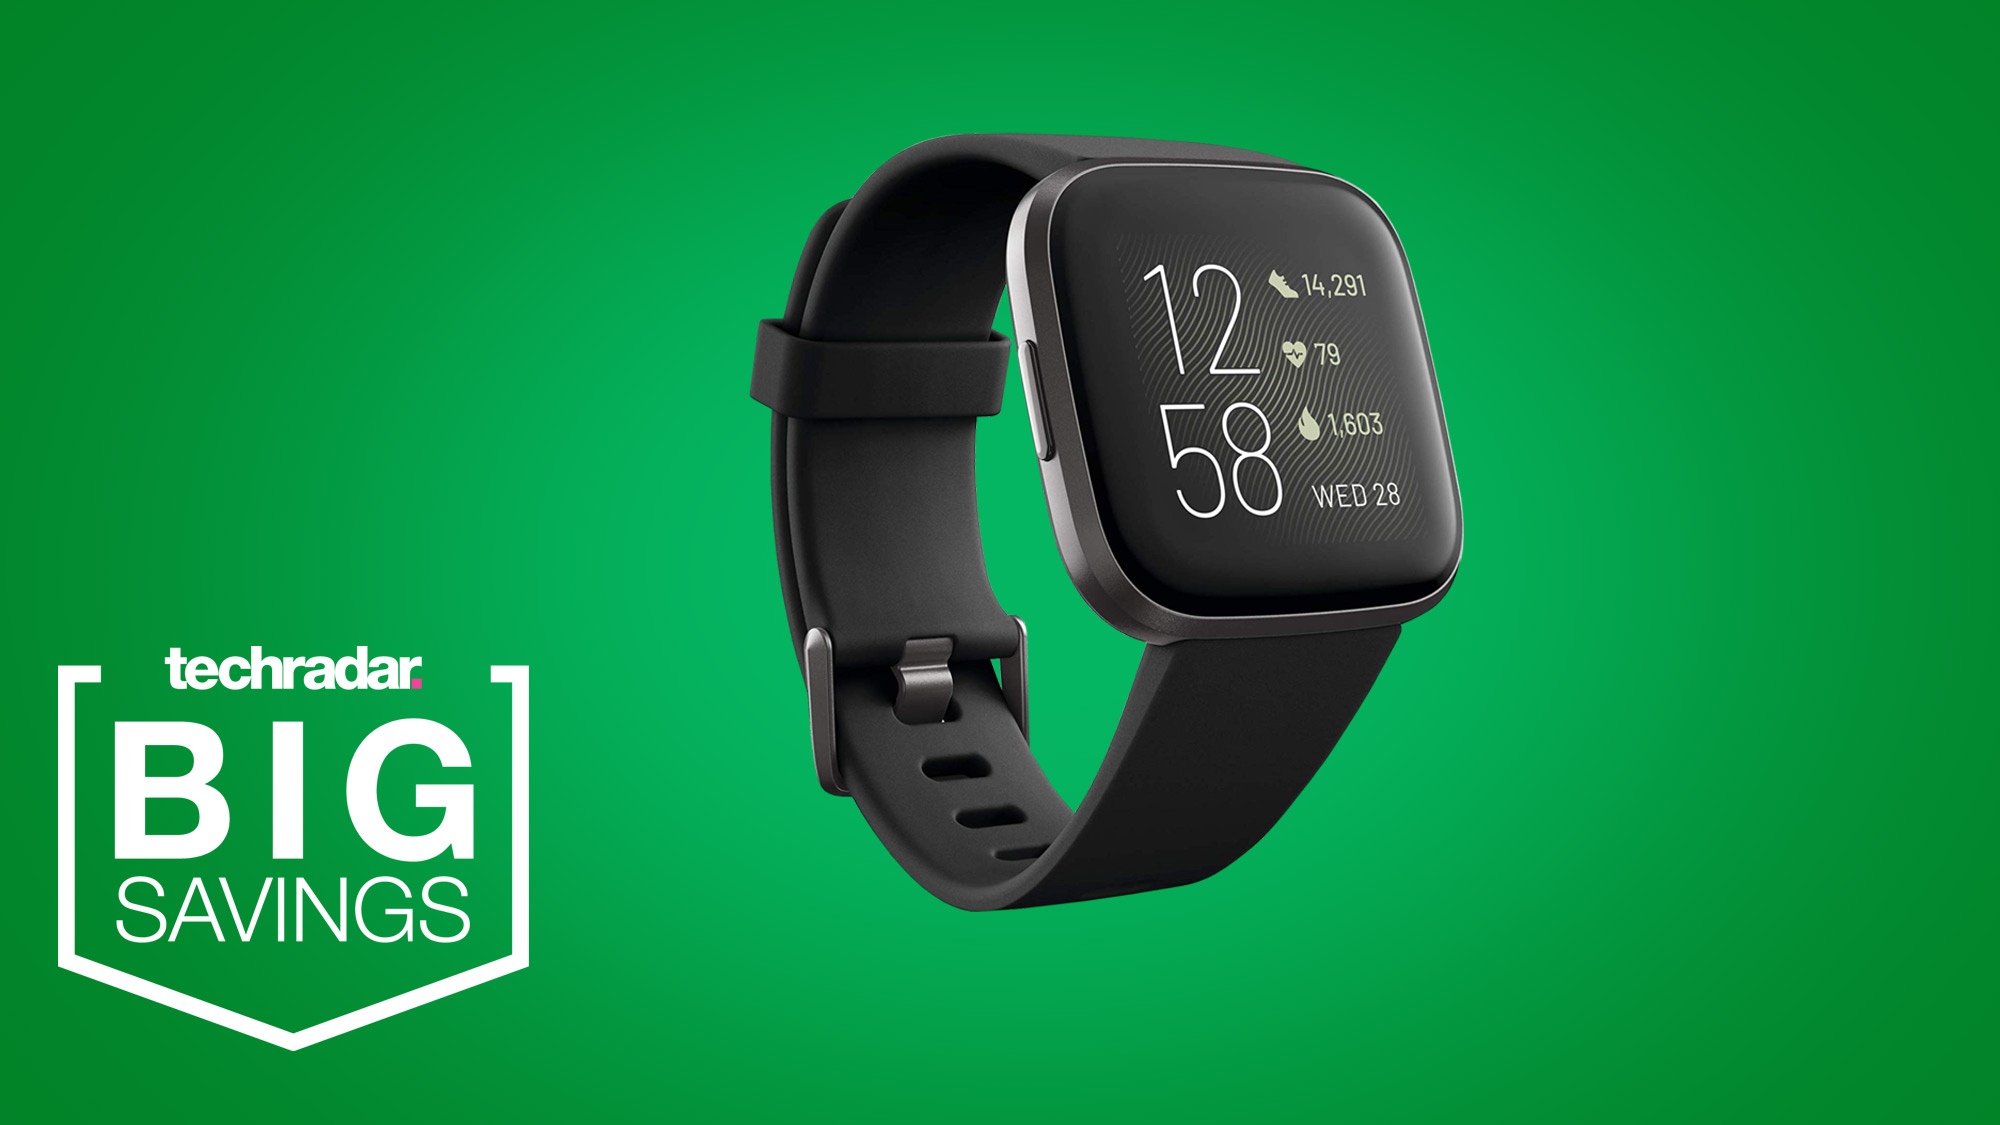 Fitbit price cut: deals on the Fitbit Versa 2, Charge 3 and Ionic ...